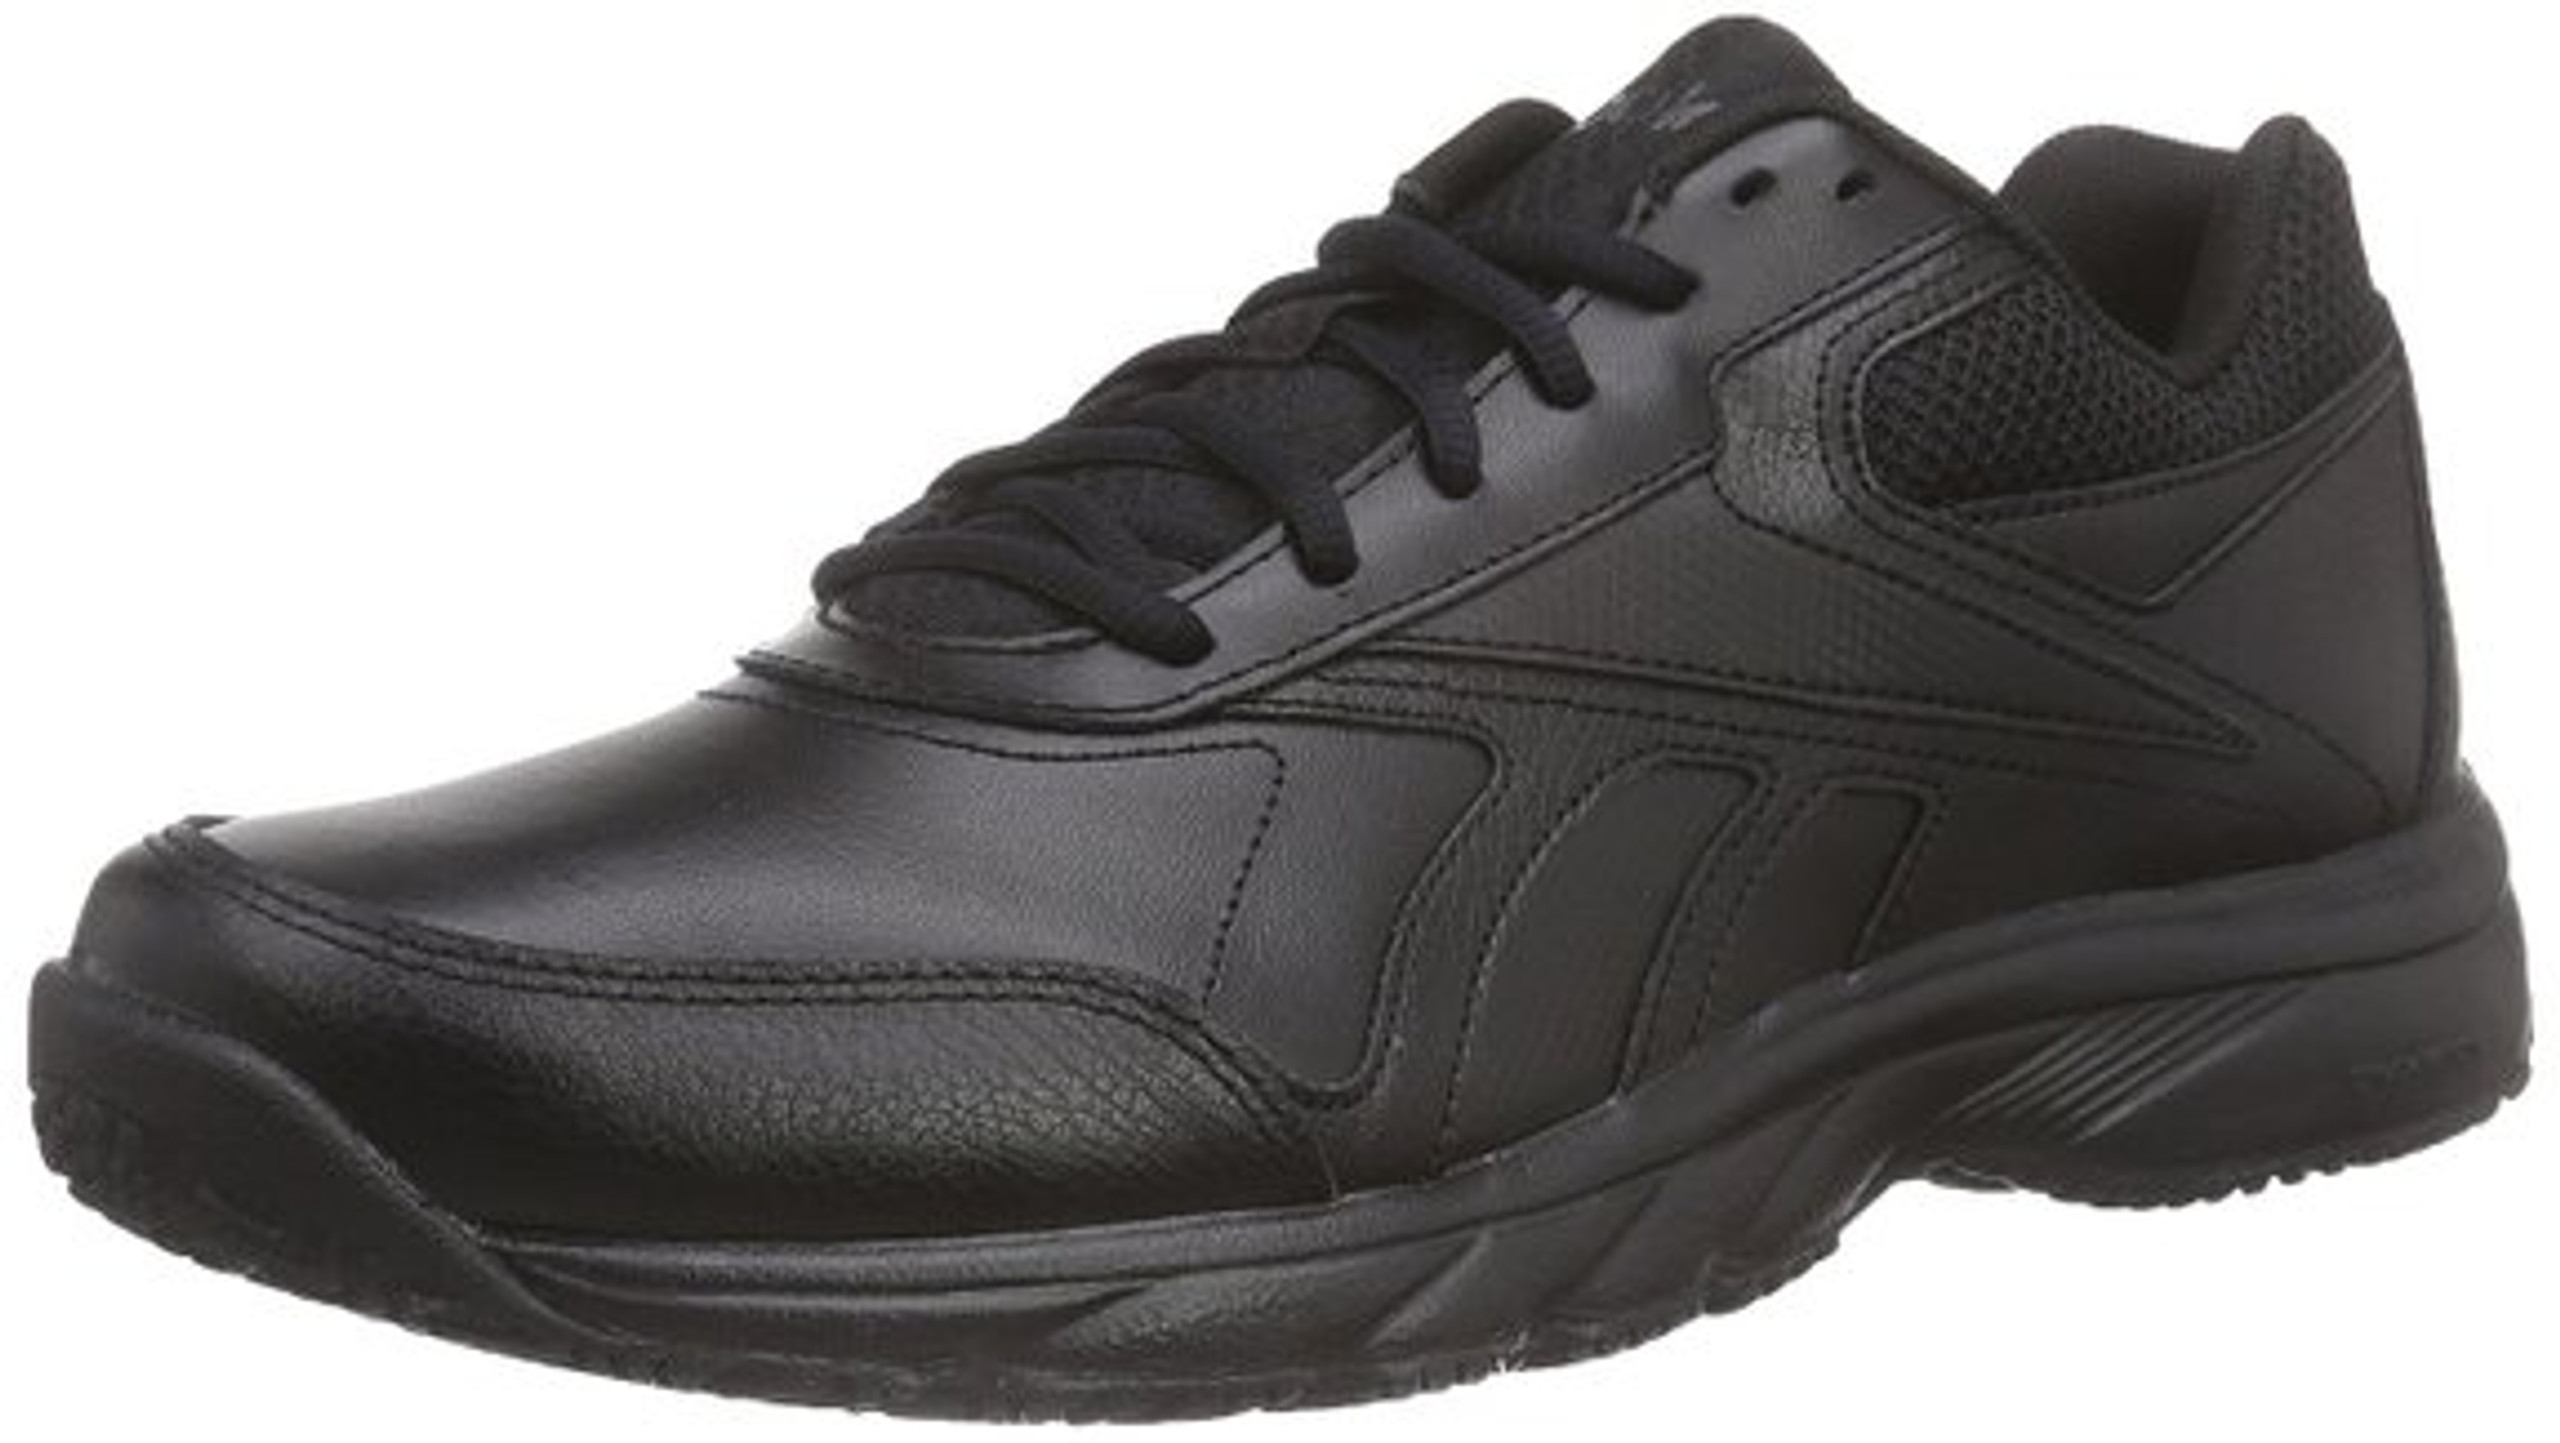 Basketball Referee Shoes | Referee Gear | Referee Equipment